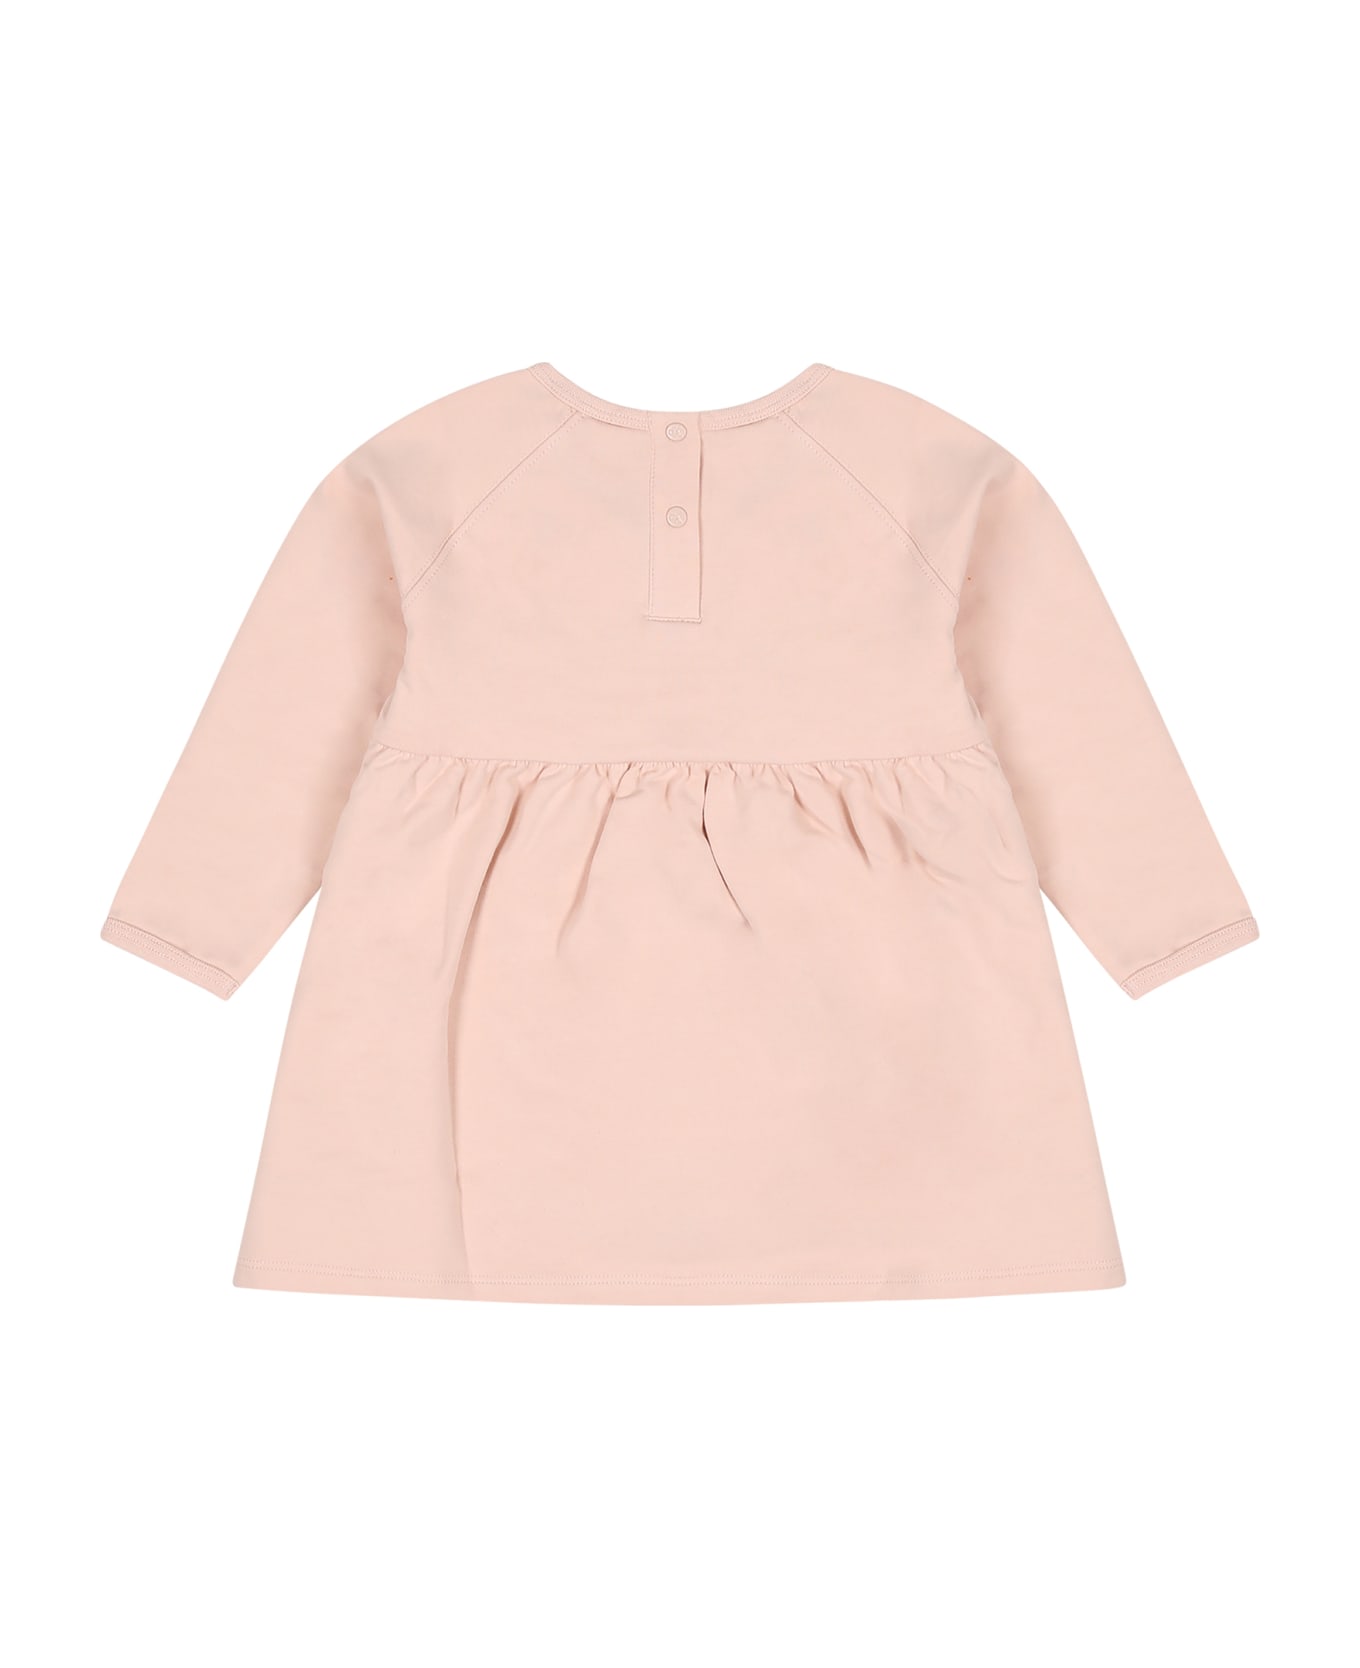 Calvin Klein Pink Dress For Baby Girl With Logo - Pink